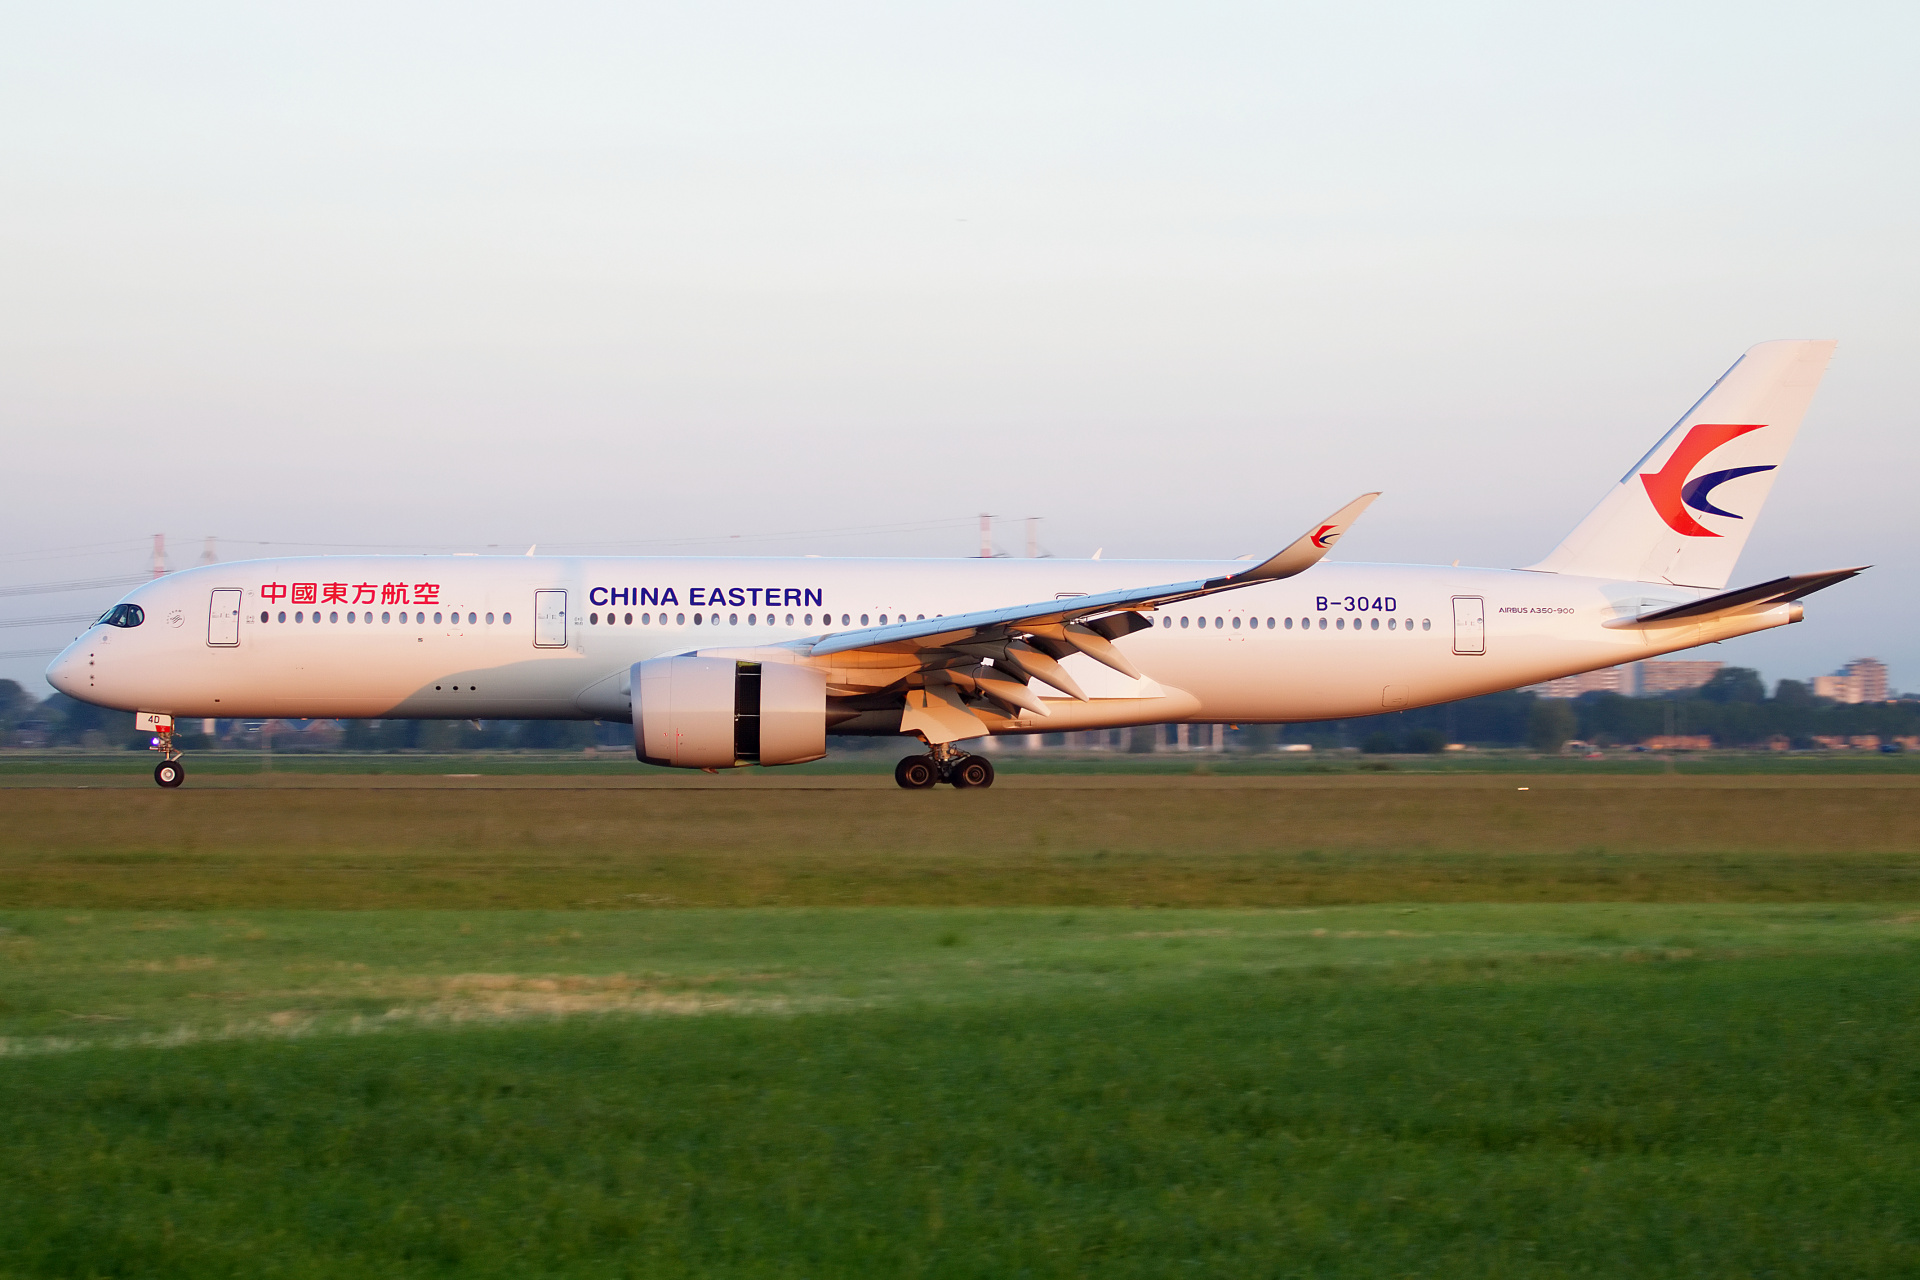 B-304D, China Eastern Airlines (Aircraft » Schiphol Spotting » Airbus A350-900)